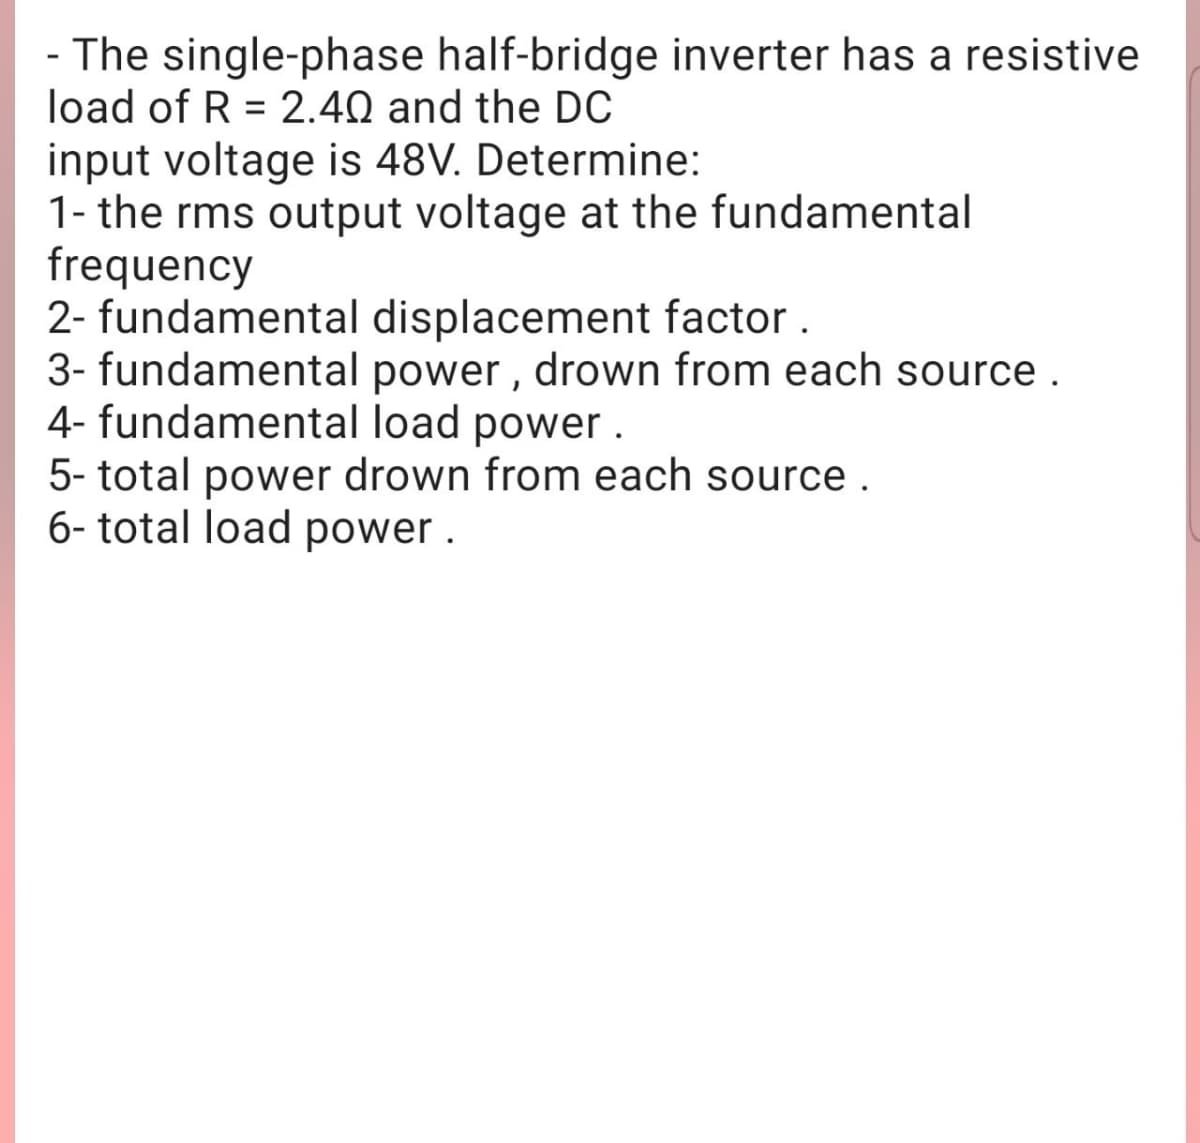 - The single-phase half-bridge inverter has a resistive
load of R = 2.40 and the DC
input voltage is 48V. Determine:
1- the rms output voltage at the fundamental
frequency
2- fundamental displacement factor .
3- fundamental power , drown from each source .
4- fundamental load power.
5- total power drown from each source.
6- total load power .
